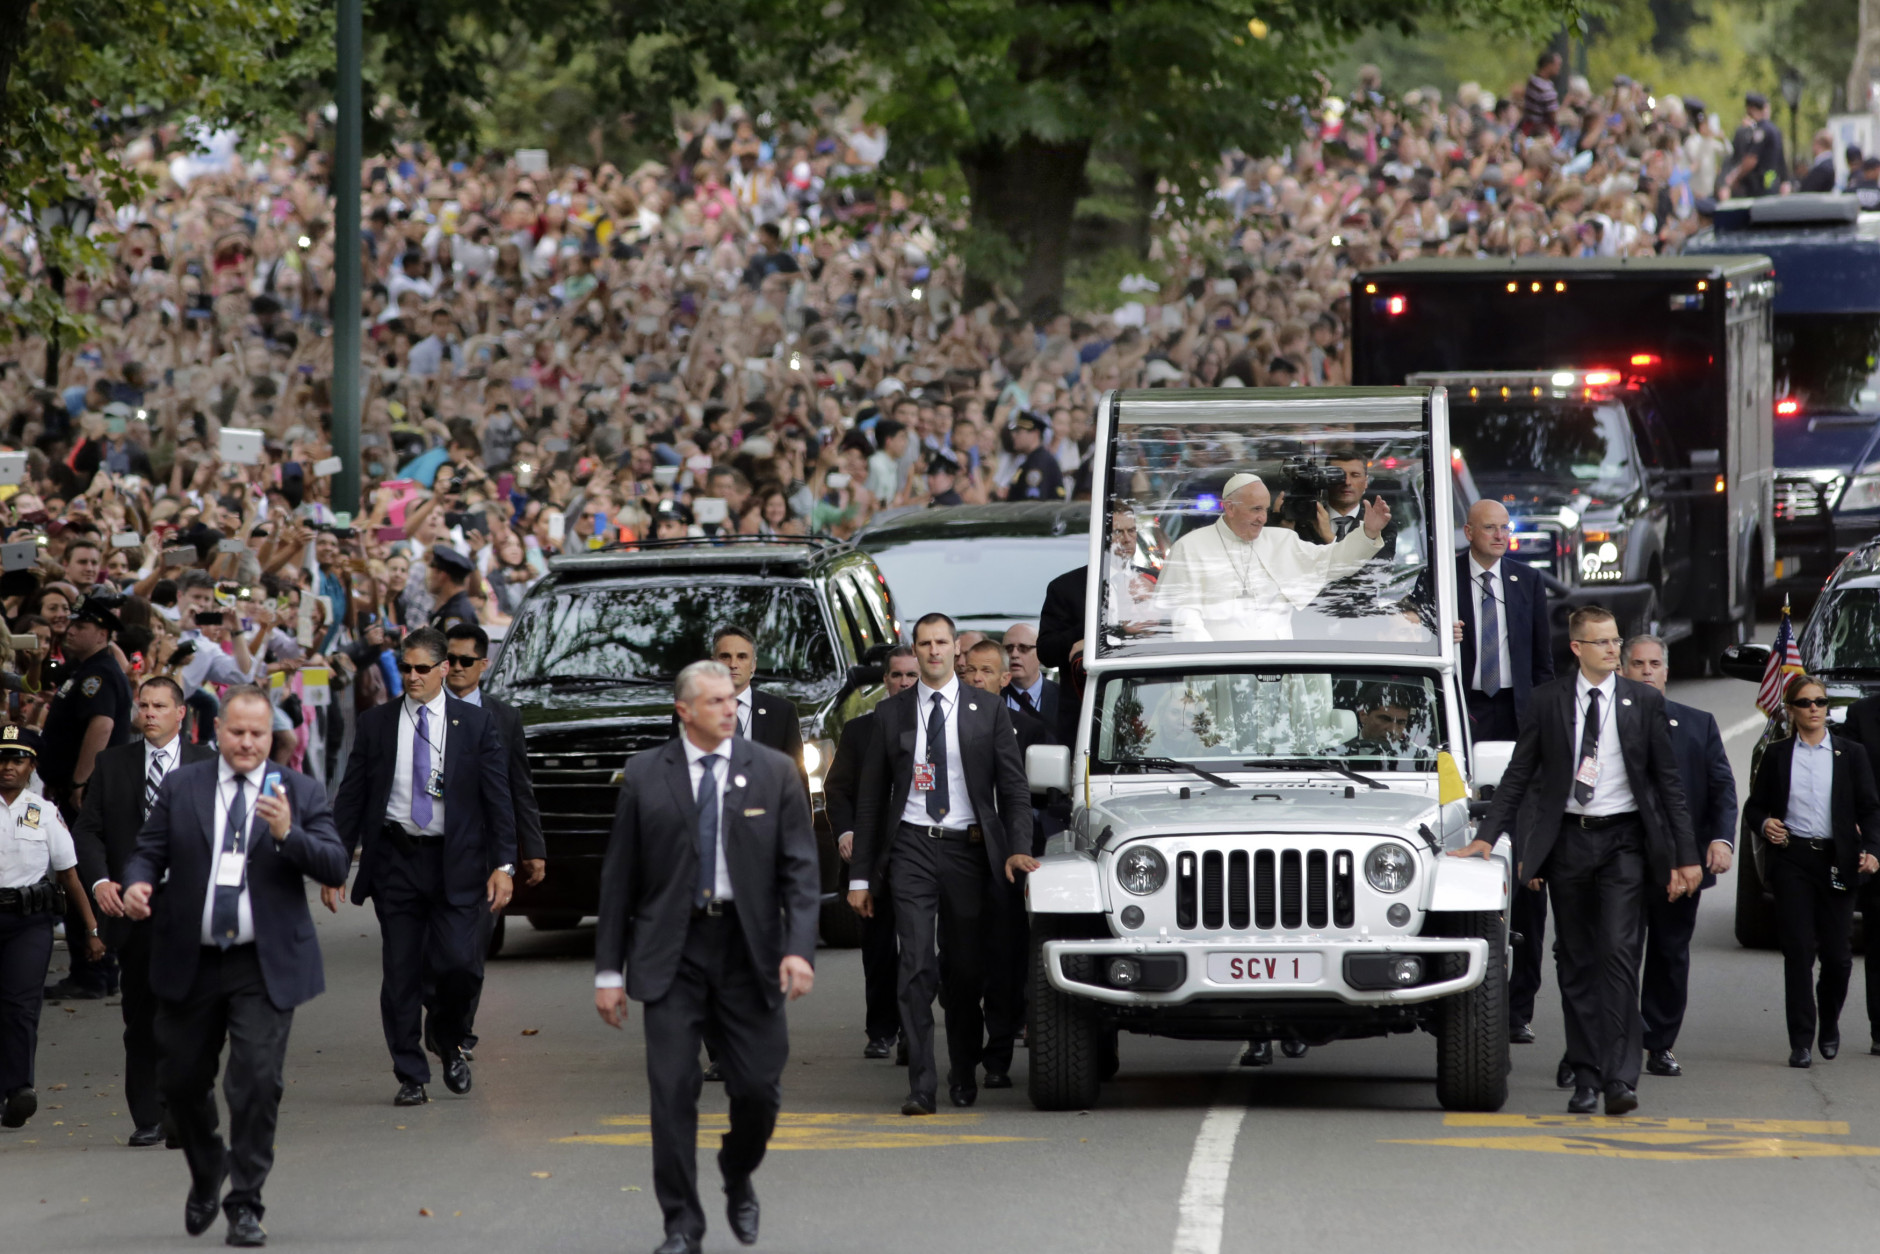 Pope Francis rides the popemobile in New York's Central Park, Friday, Sept. 25, 2015. (AP Photo/Richard Drew, Pool)